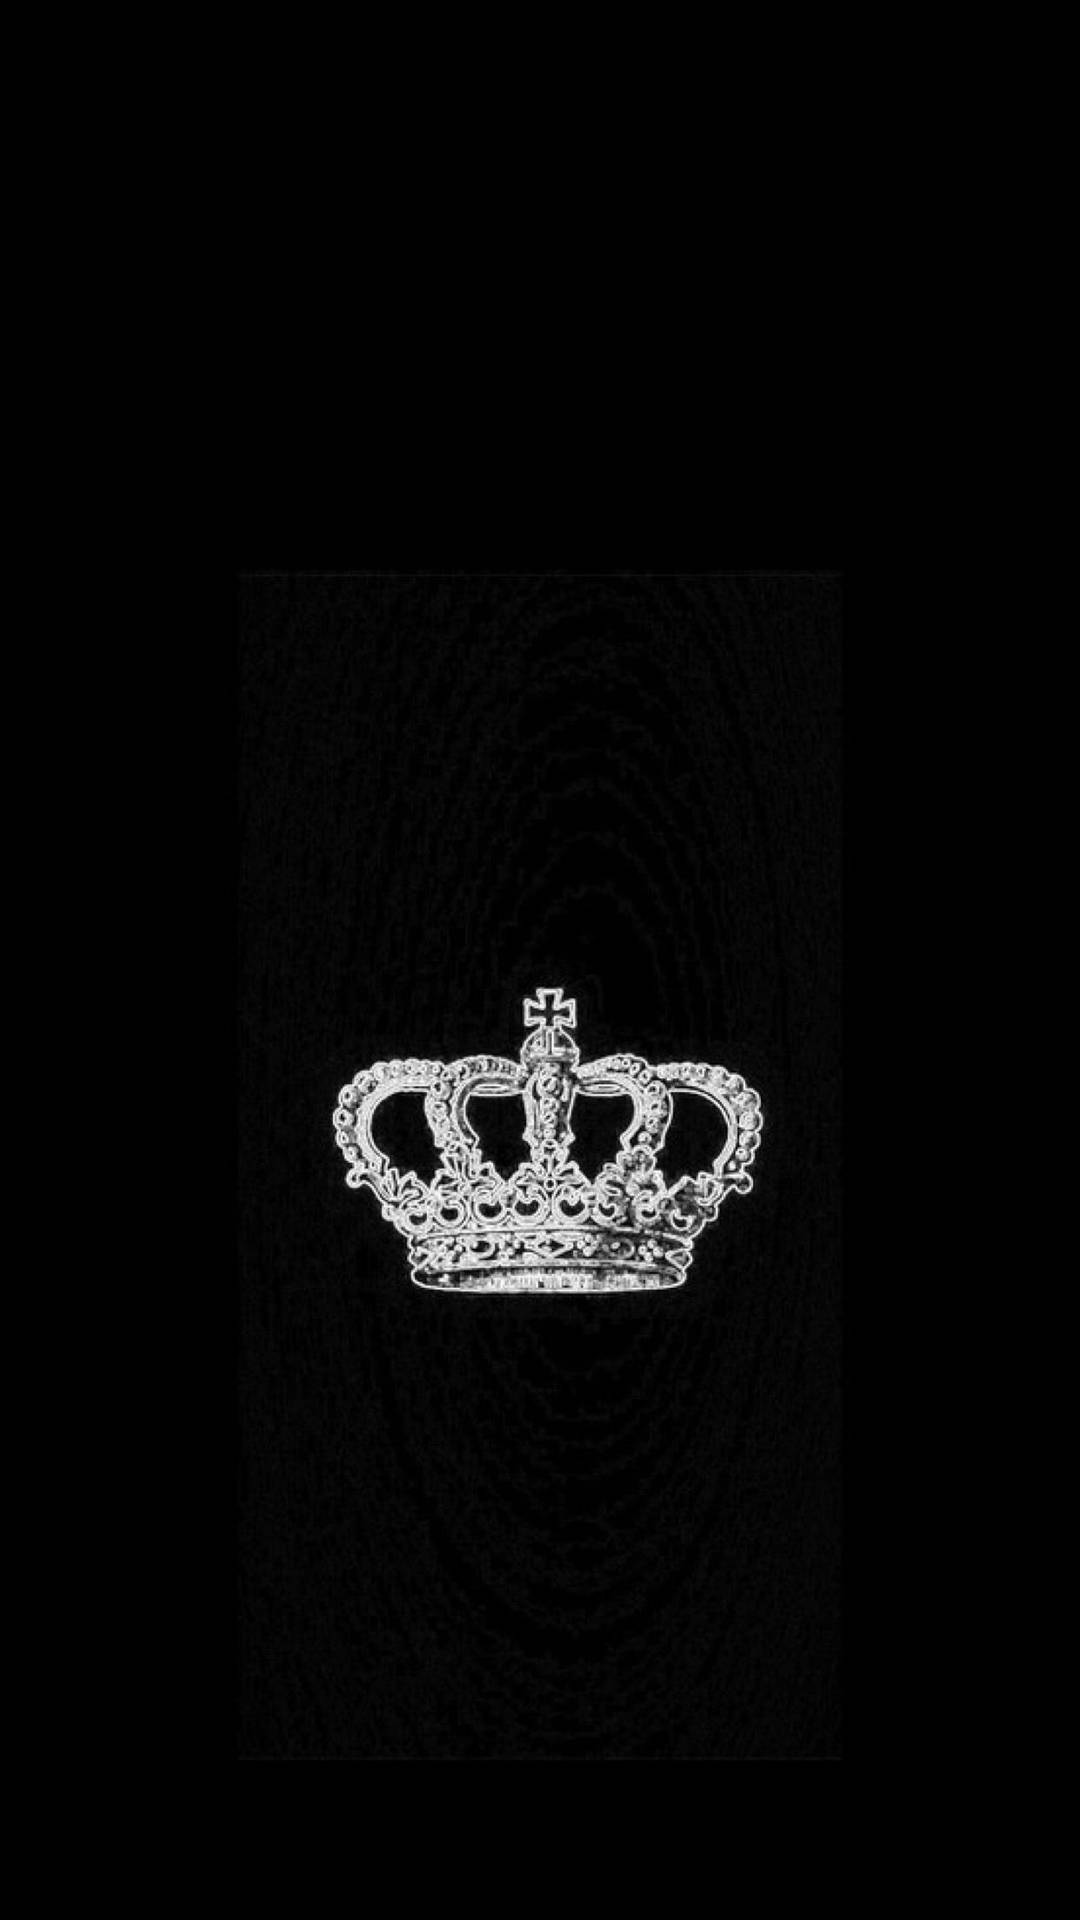 Magnificent Black King Crown Background